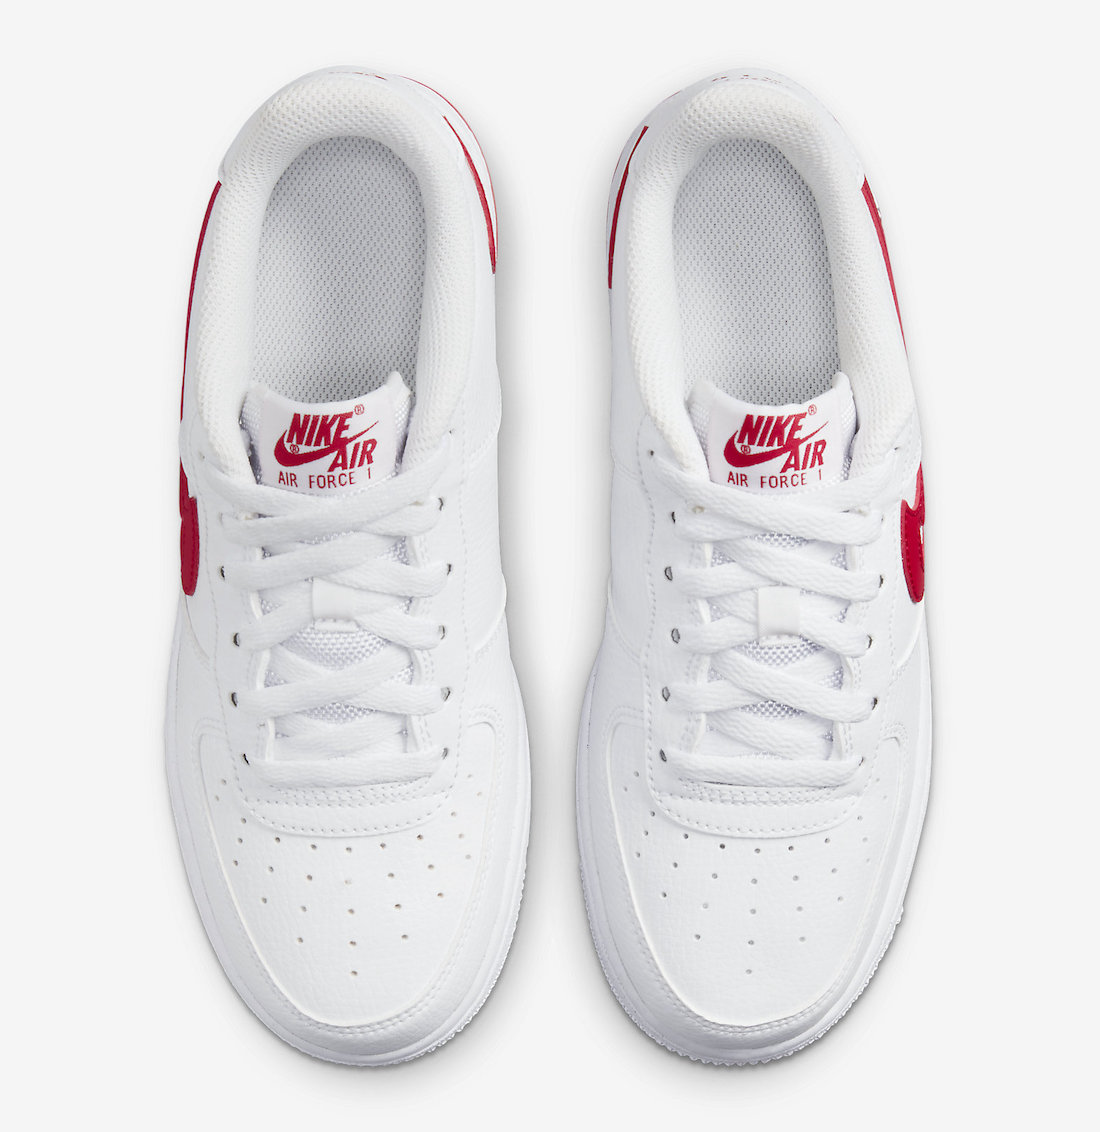 Nike Air Force 1 Low FM White Red DR7970-100 Release Date - SBD